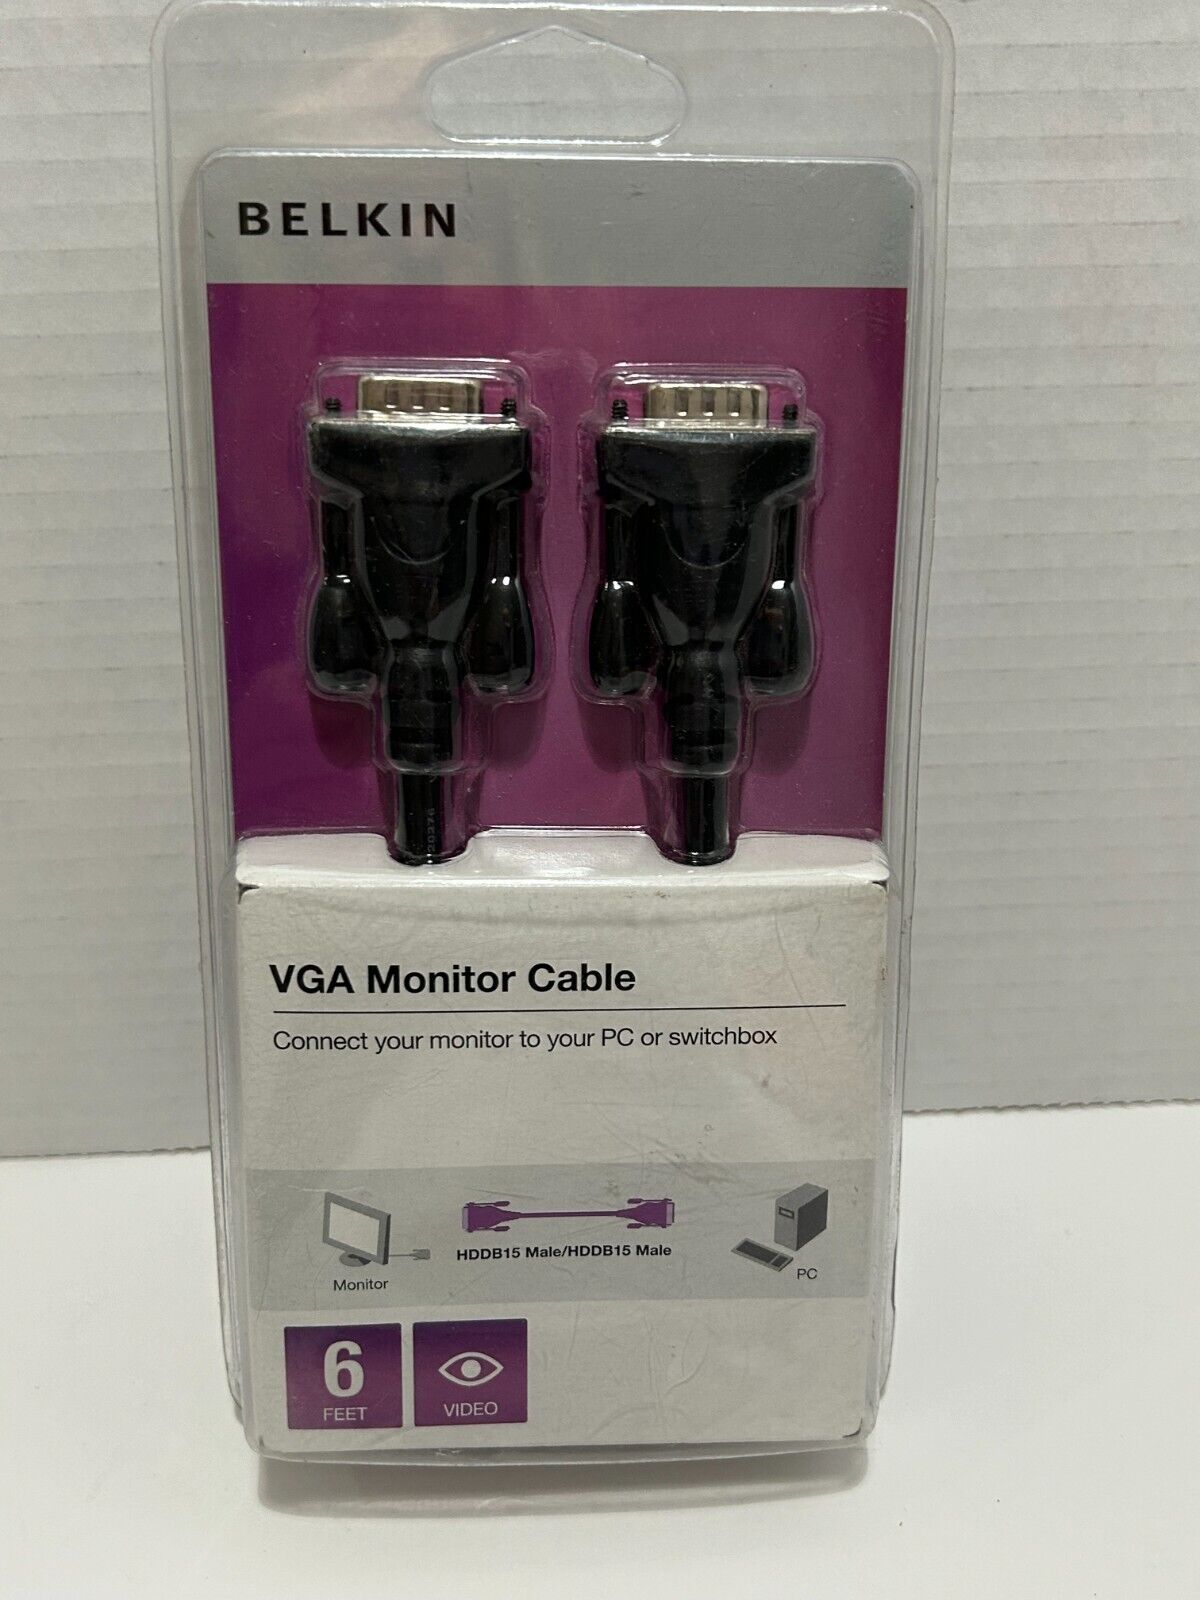 Belkin 6 Foot VGA Video Cable Connect Monitor to PC or Switchbox New